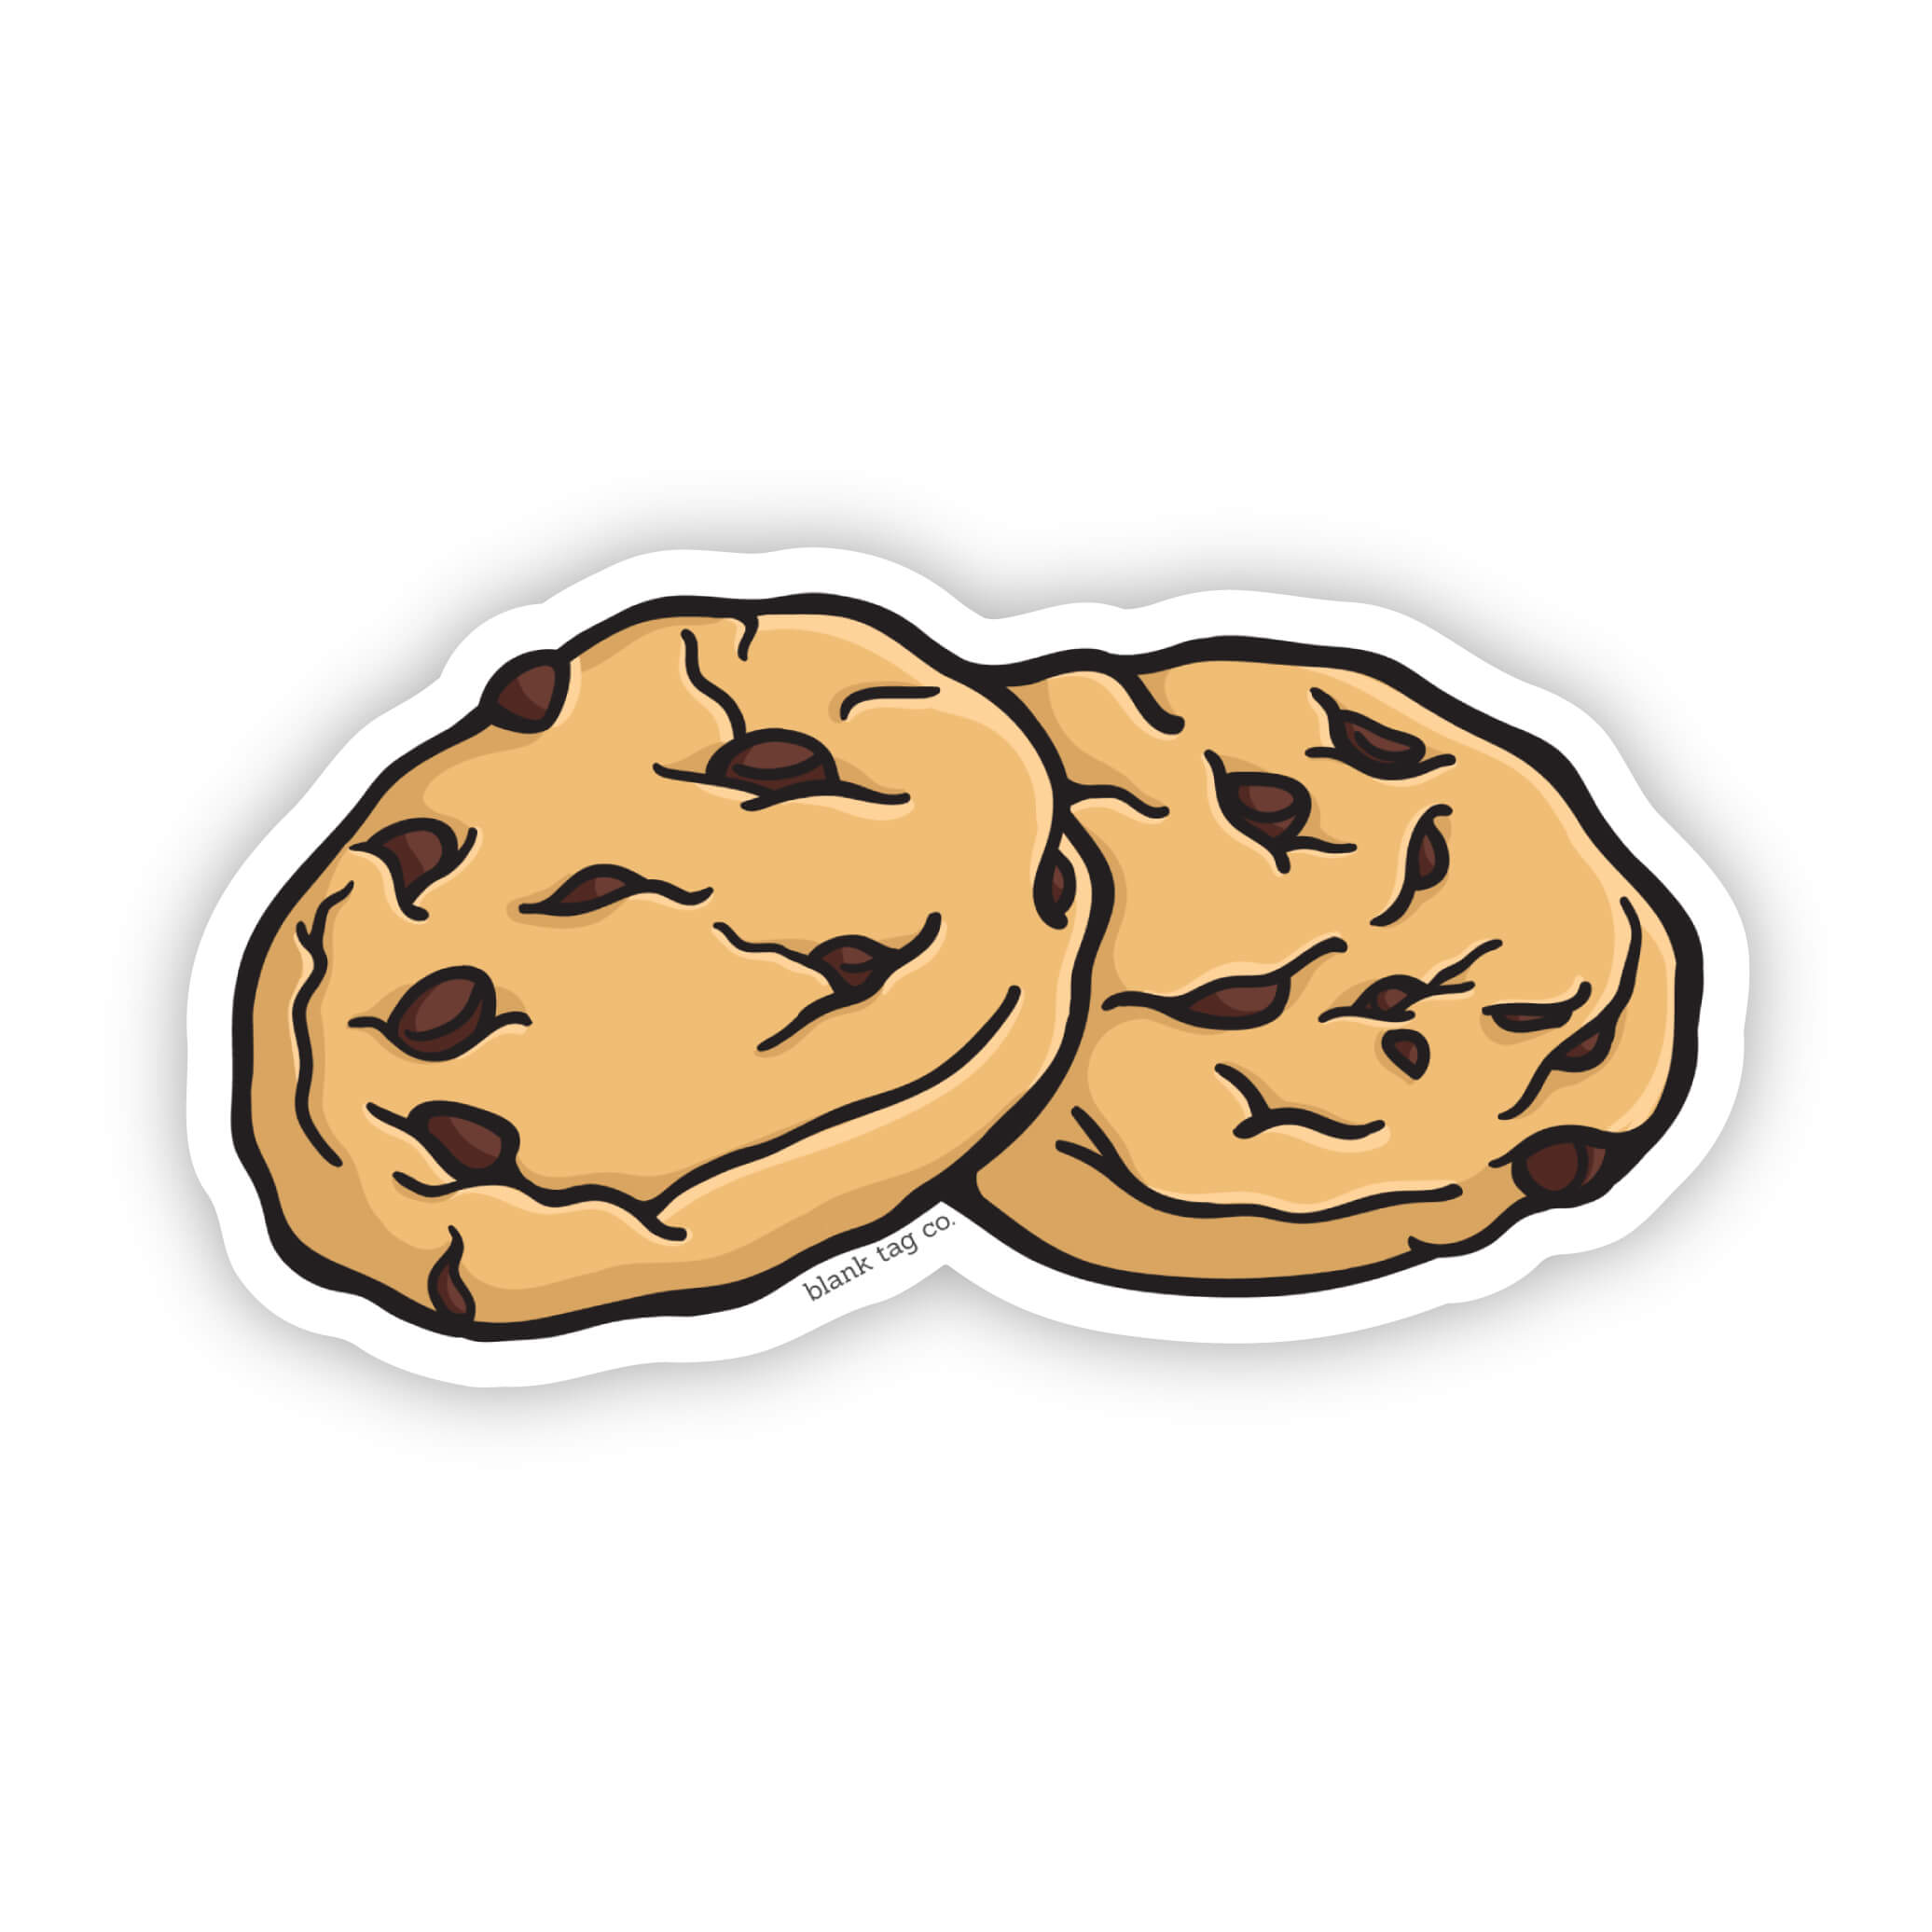 The Chocolate Chip Cookies Sticker